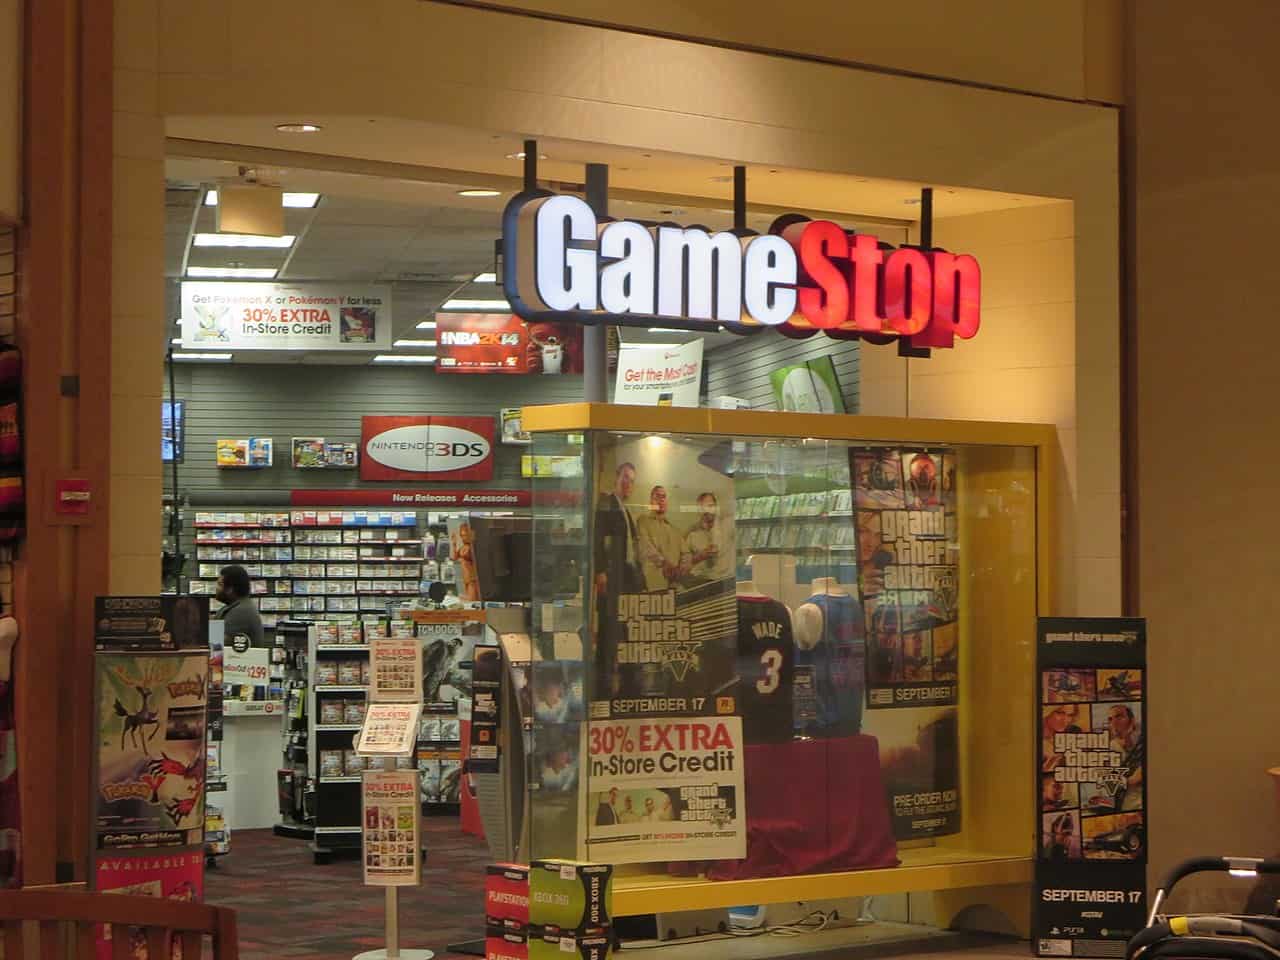 How Much Does GameStop Pay?